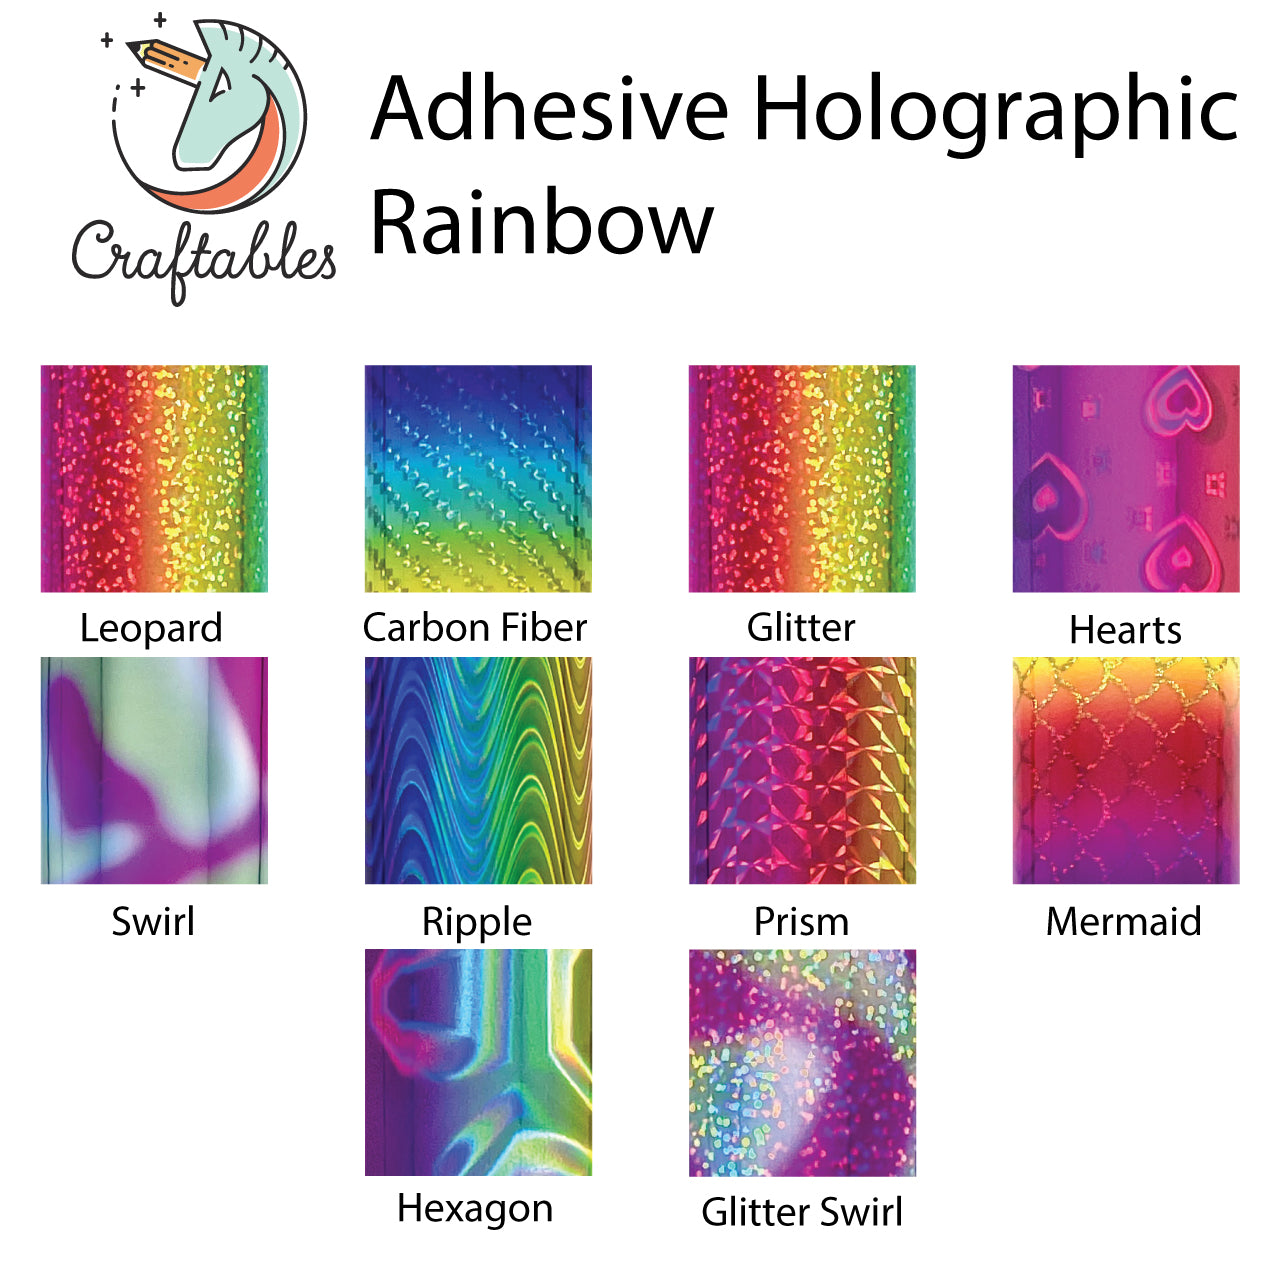 Hearts Rainbow Holographic Adhesive Vinyl Sheets By Craftables